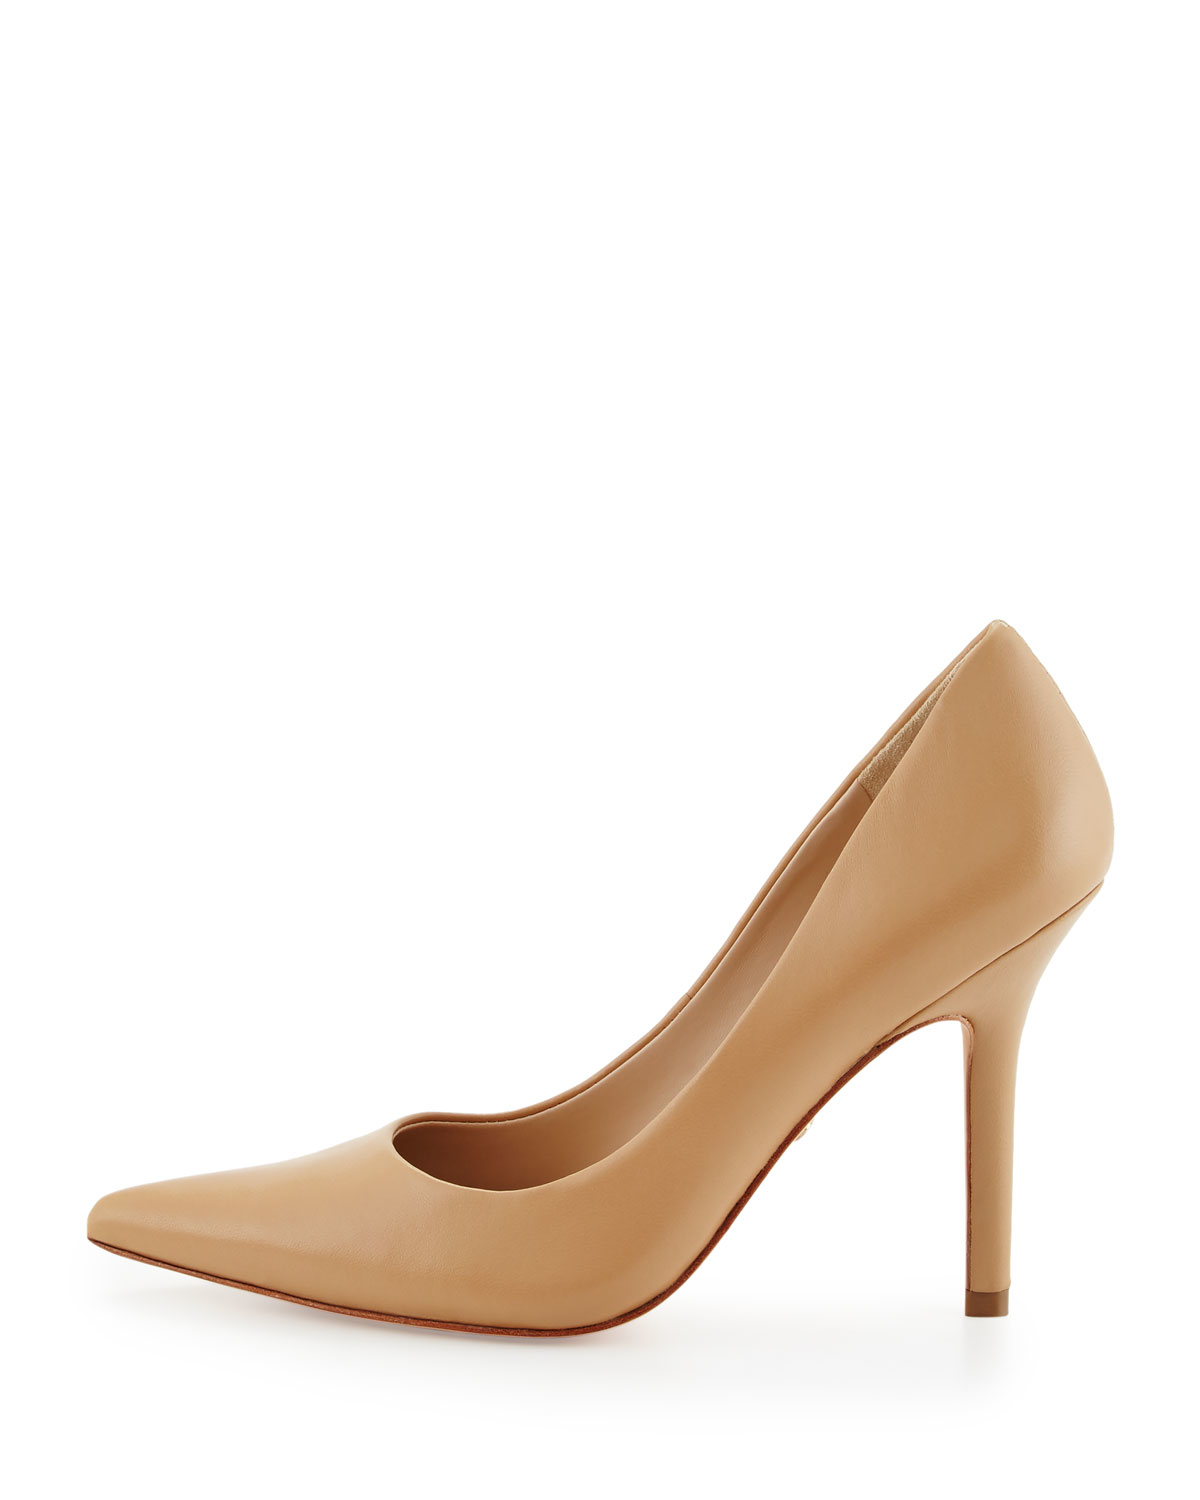 Lyst - Charles David Sway Ii Leather Pointed-toe Pump in Natural